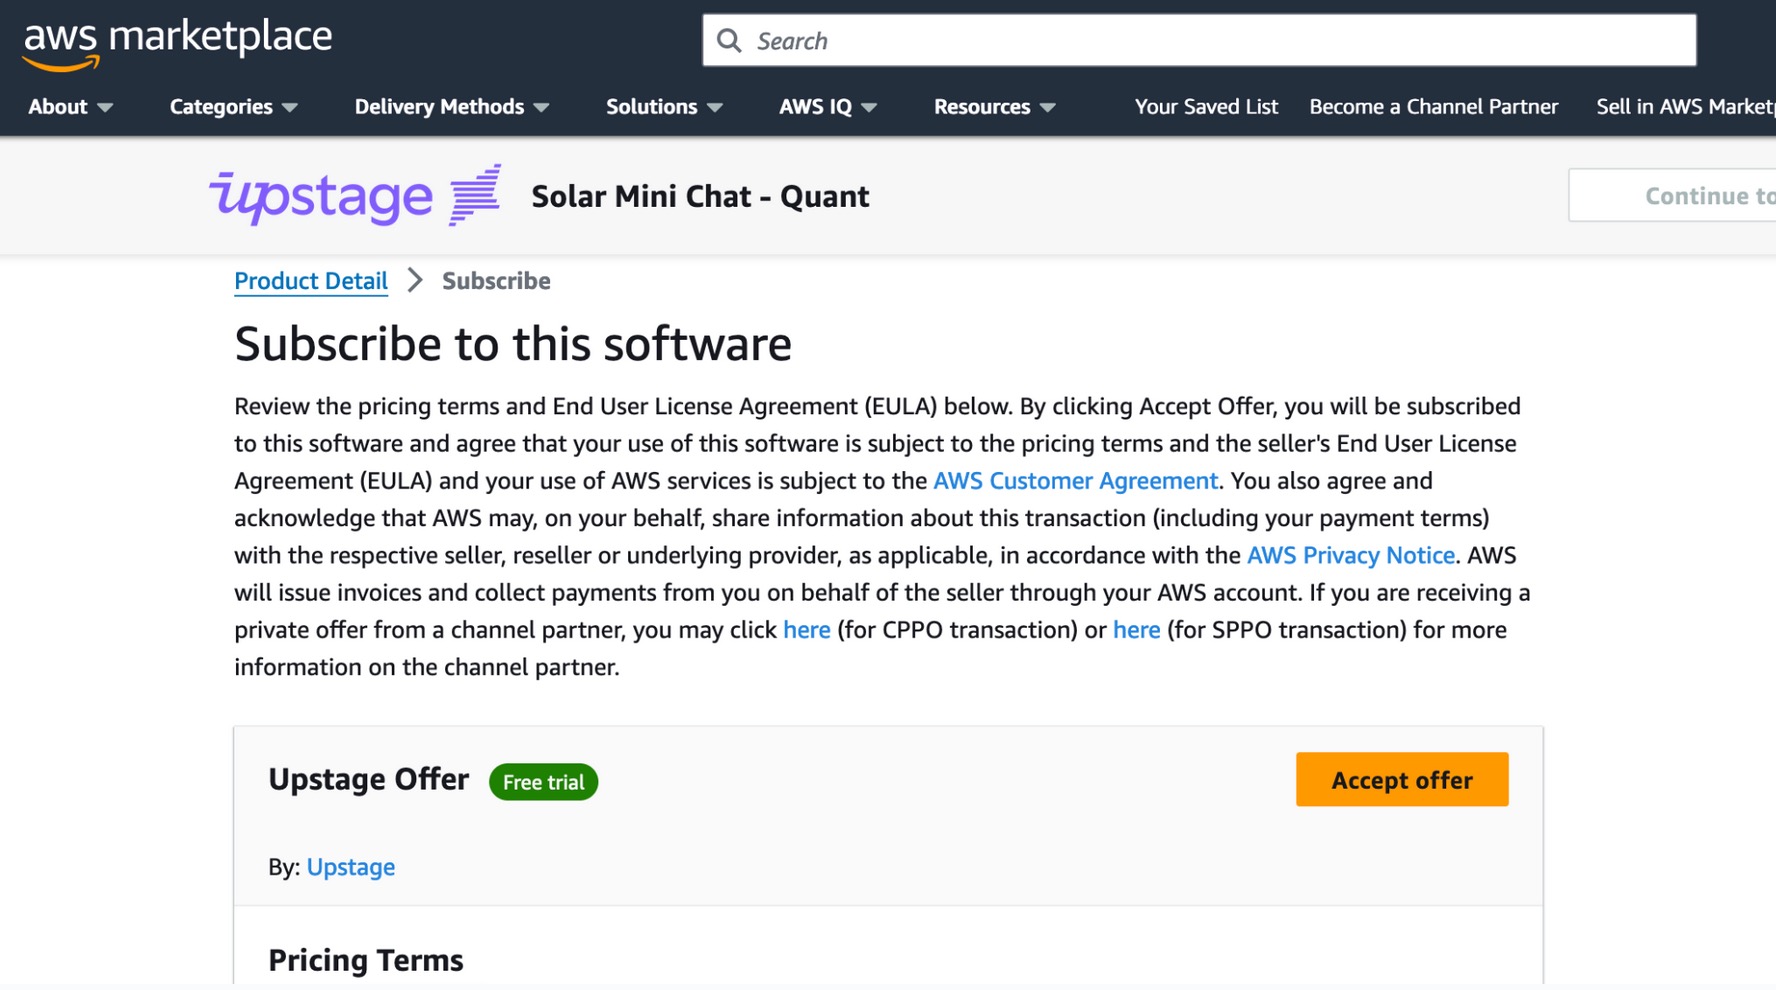 Figure - Accept offer of Solar model in AWS Marketplace